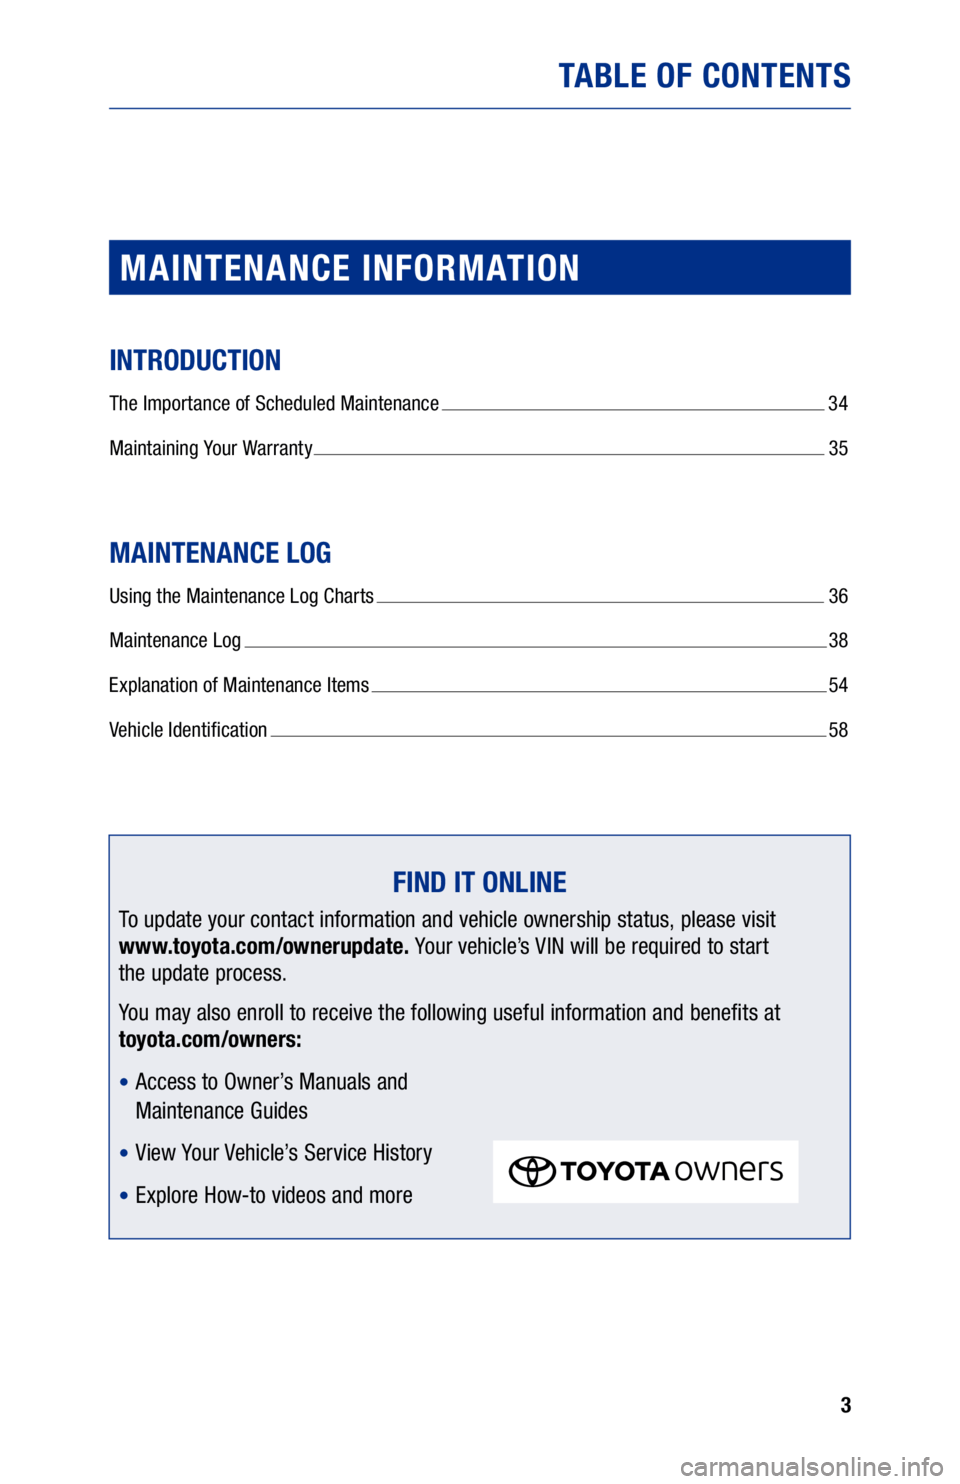 TOYOTA COROLLA 2020  Warranties & Maintenance Guides (in English) 3
TABLE OF CONTENTS
MAINTENANCE INFORMATION
INTRODUCTION
The Importance of Scheduled Maintenance  34
Maintaining Your Warranty 
  35
MAINTENANCE LOG
Using the Maintenance Log Charts   36
Maintenance L